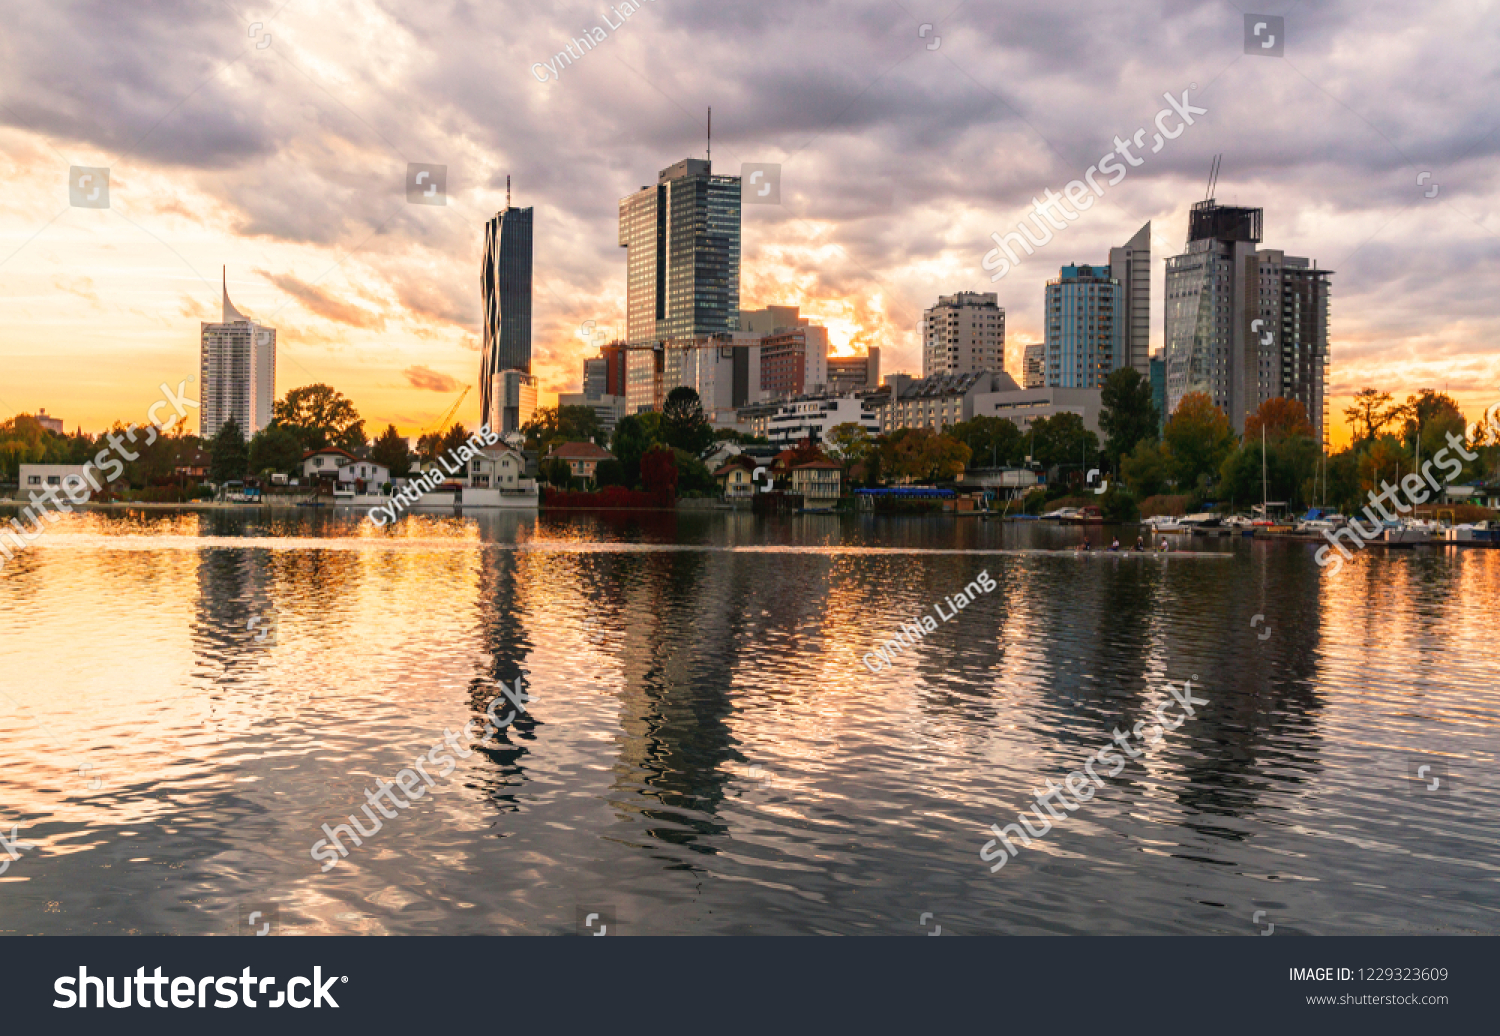 Vienna, Austria - October 11, 2017: Gorgeous sunset reflection of Vienna on the Danube River. #1229323609